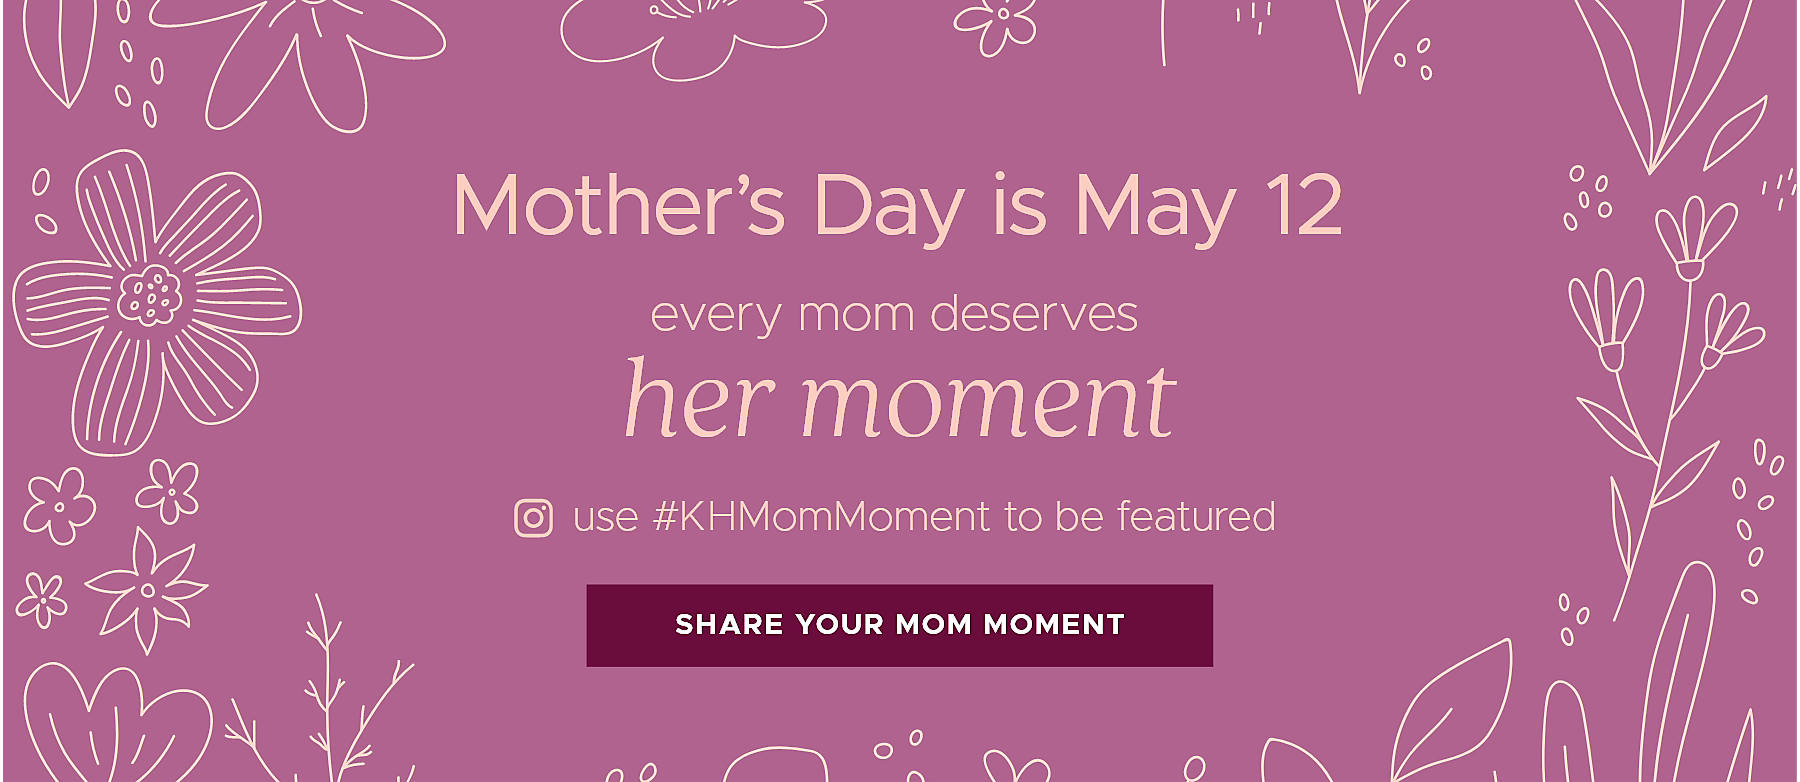 Mother's Day is May 12 every mom deserves her moment instagram use #KHMomMoment Share Your Mom Moment